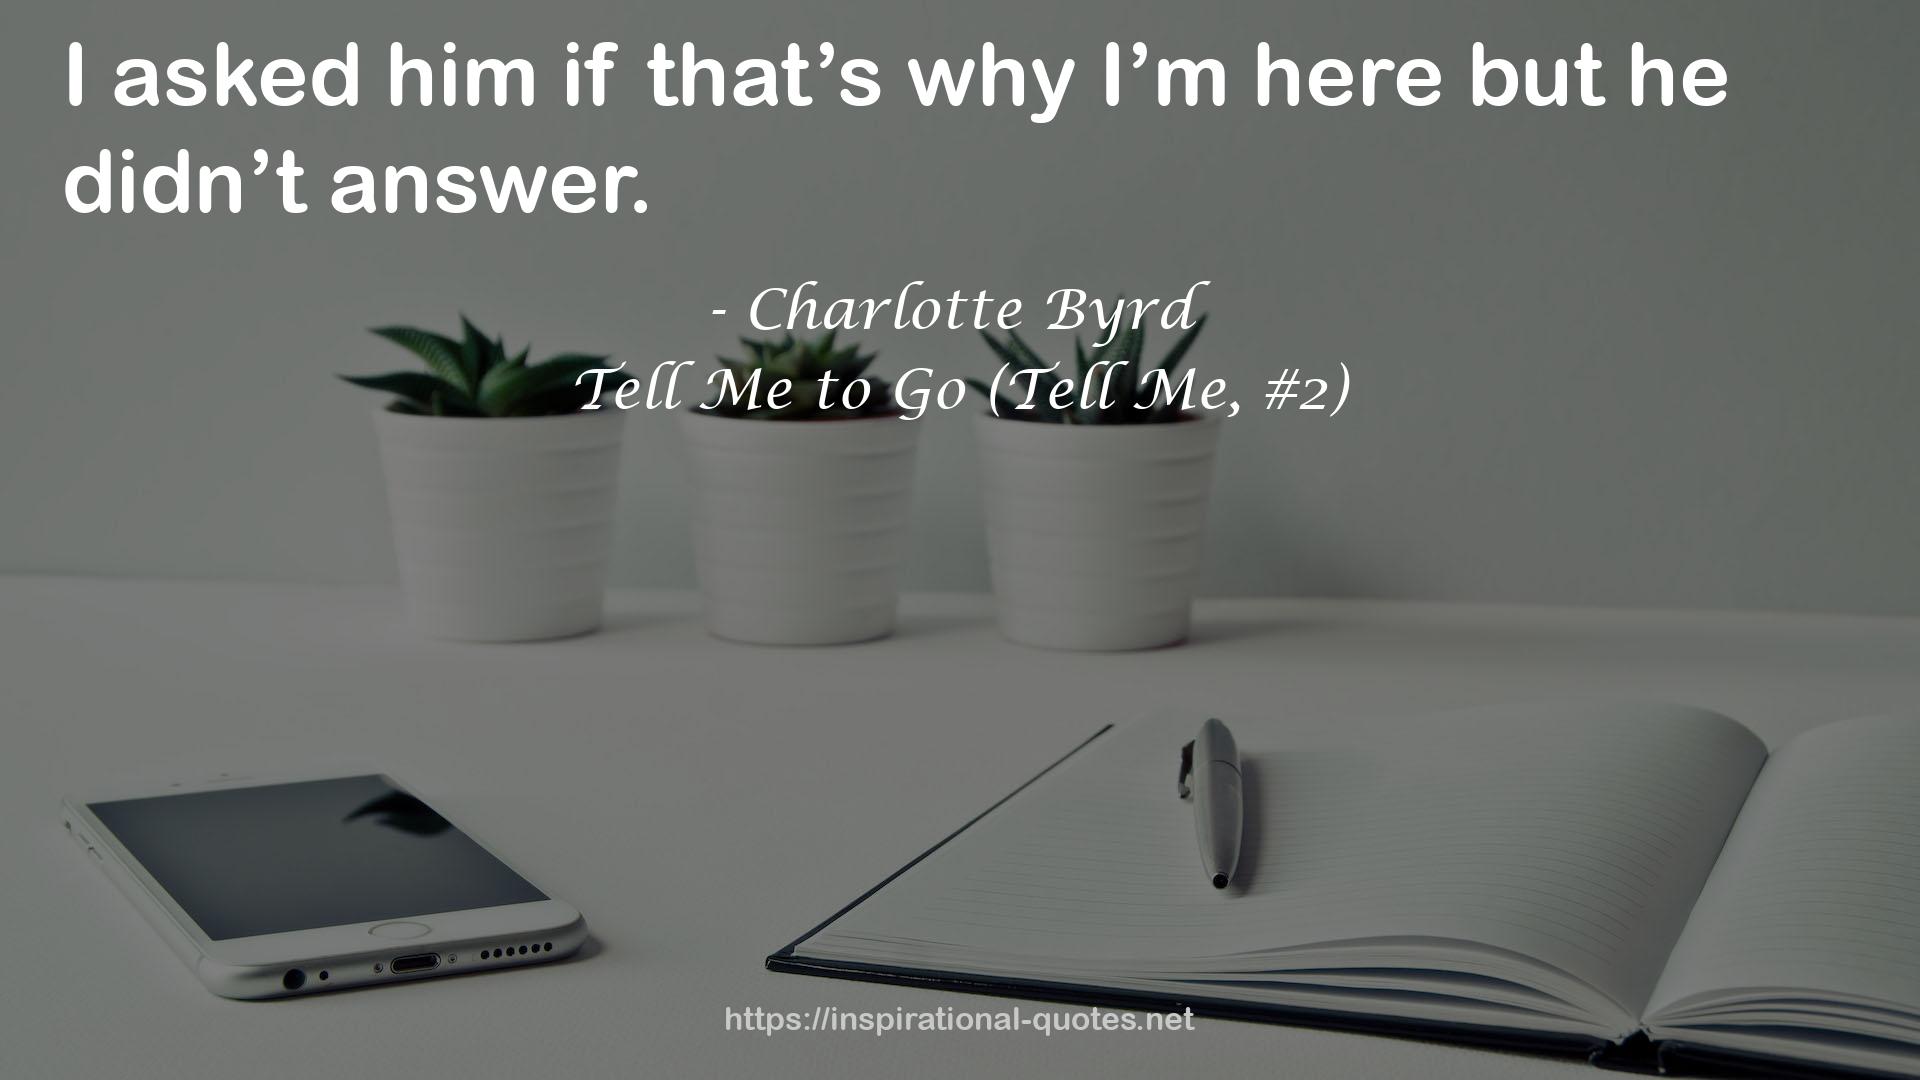 Tell Me to Go (Tell Me, #2) QUOTES